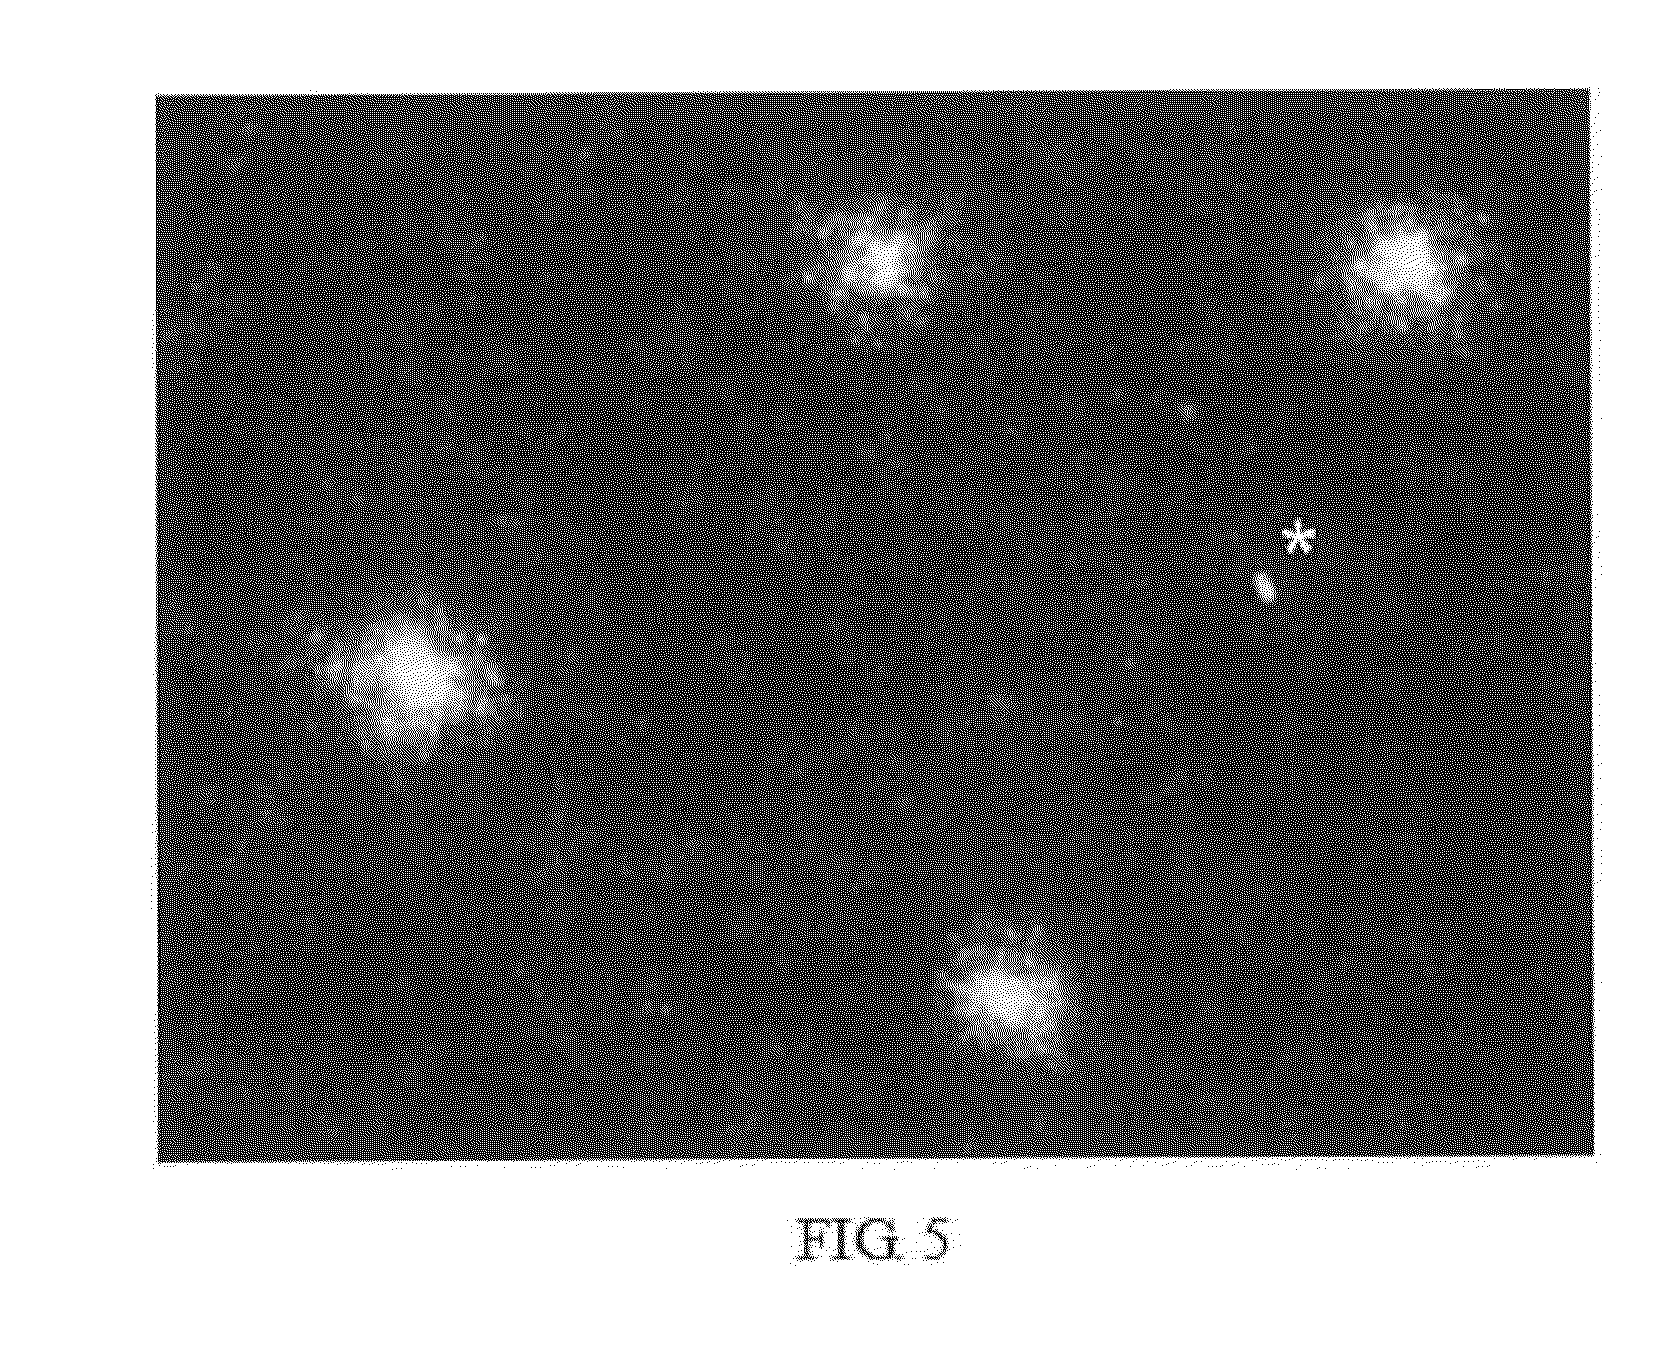 Method for evaluating bacterial cell wall integrity